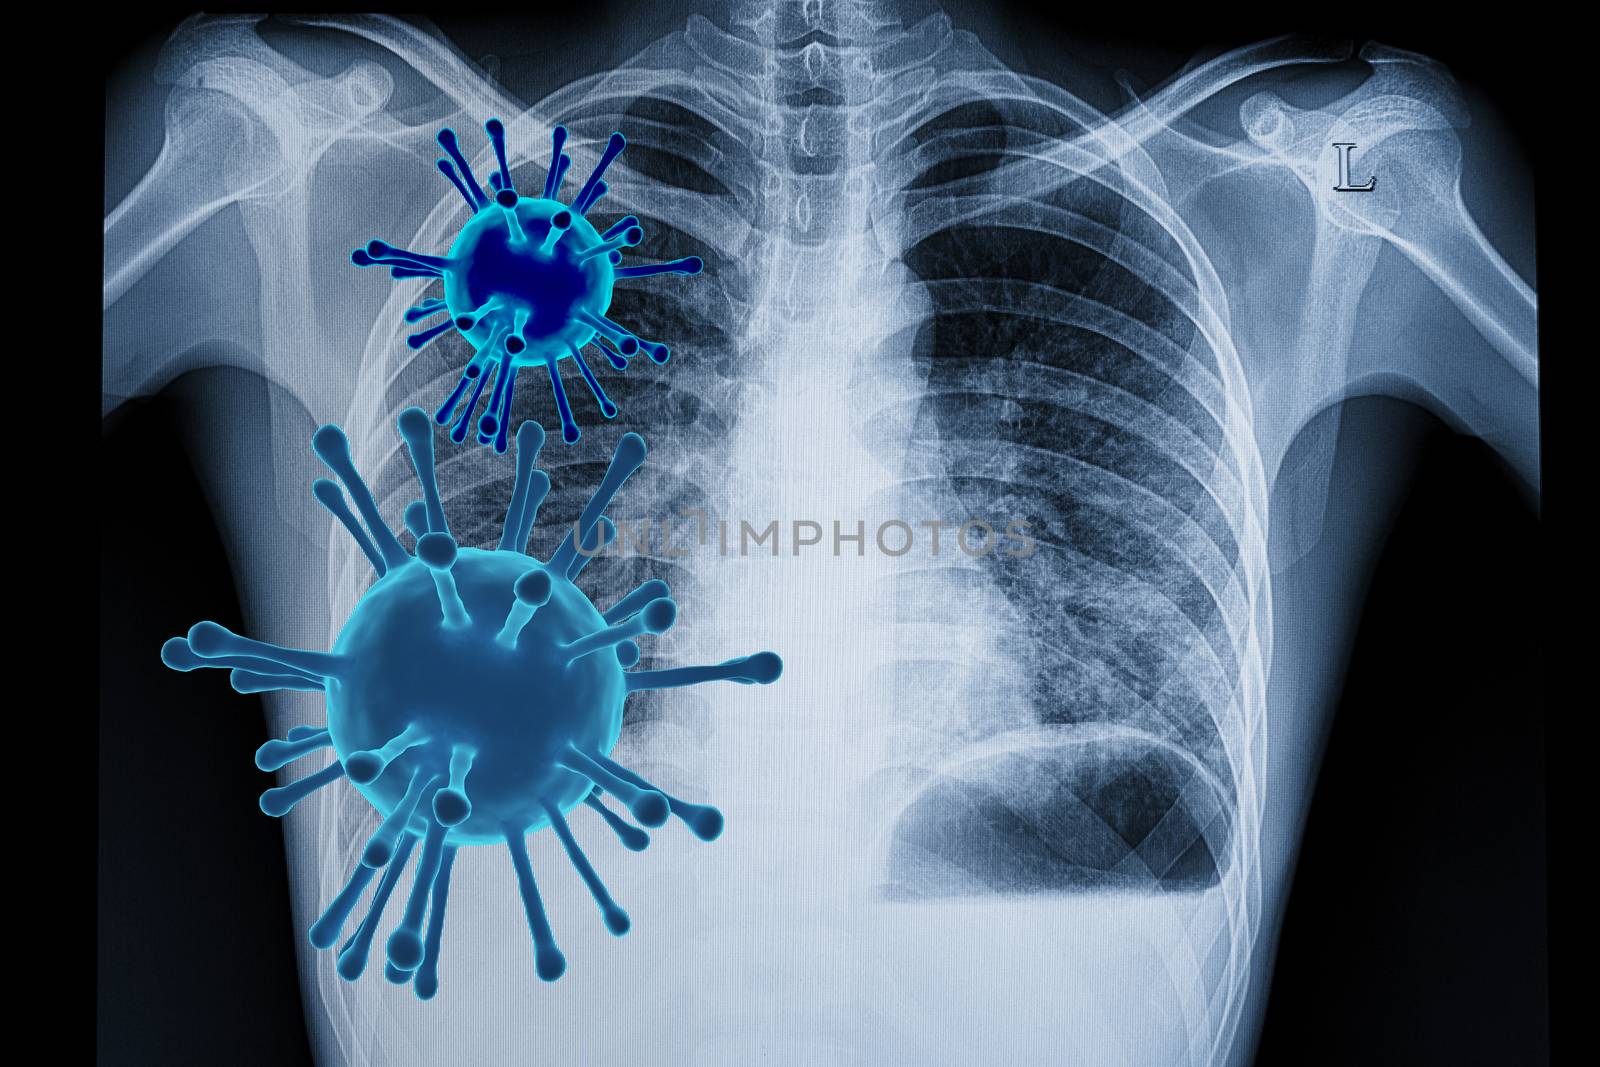 Visual illustration of coronavirus (covid-19) infection in the lungs with 3D rendered viral particles and a chest xray film of a patient with bilateral lower lungs pneumonia.